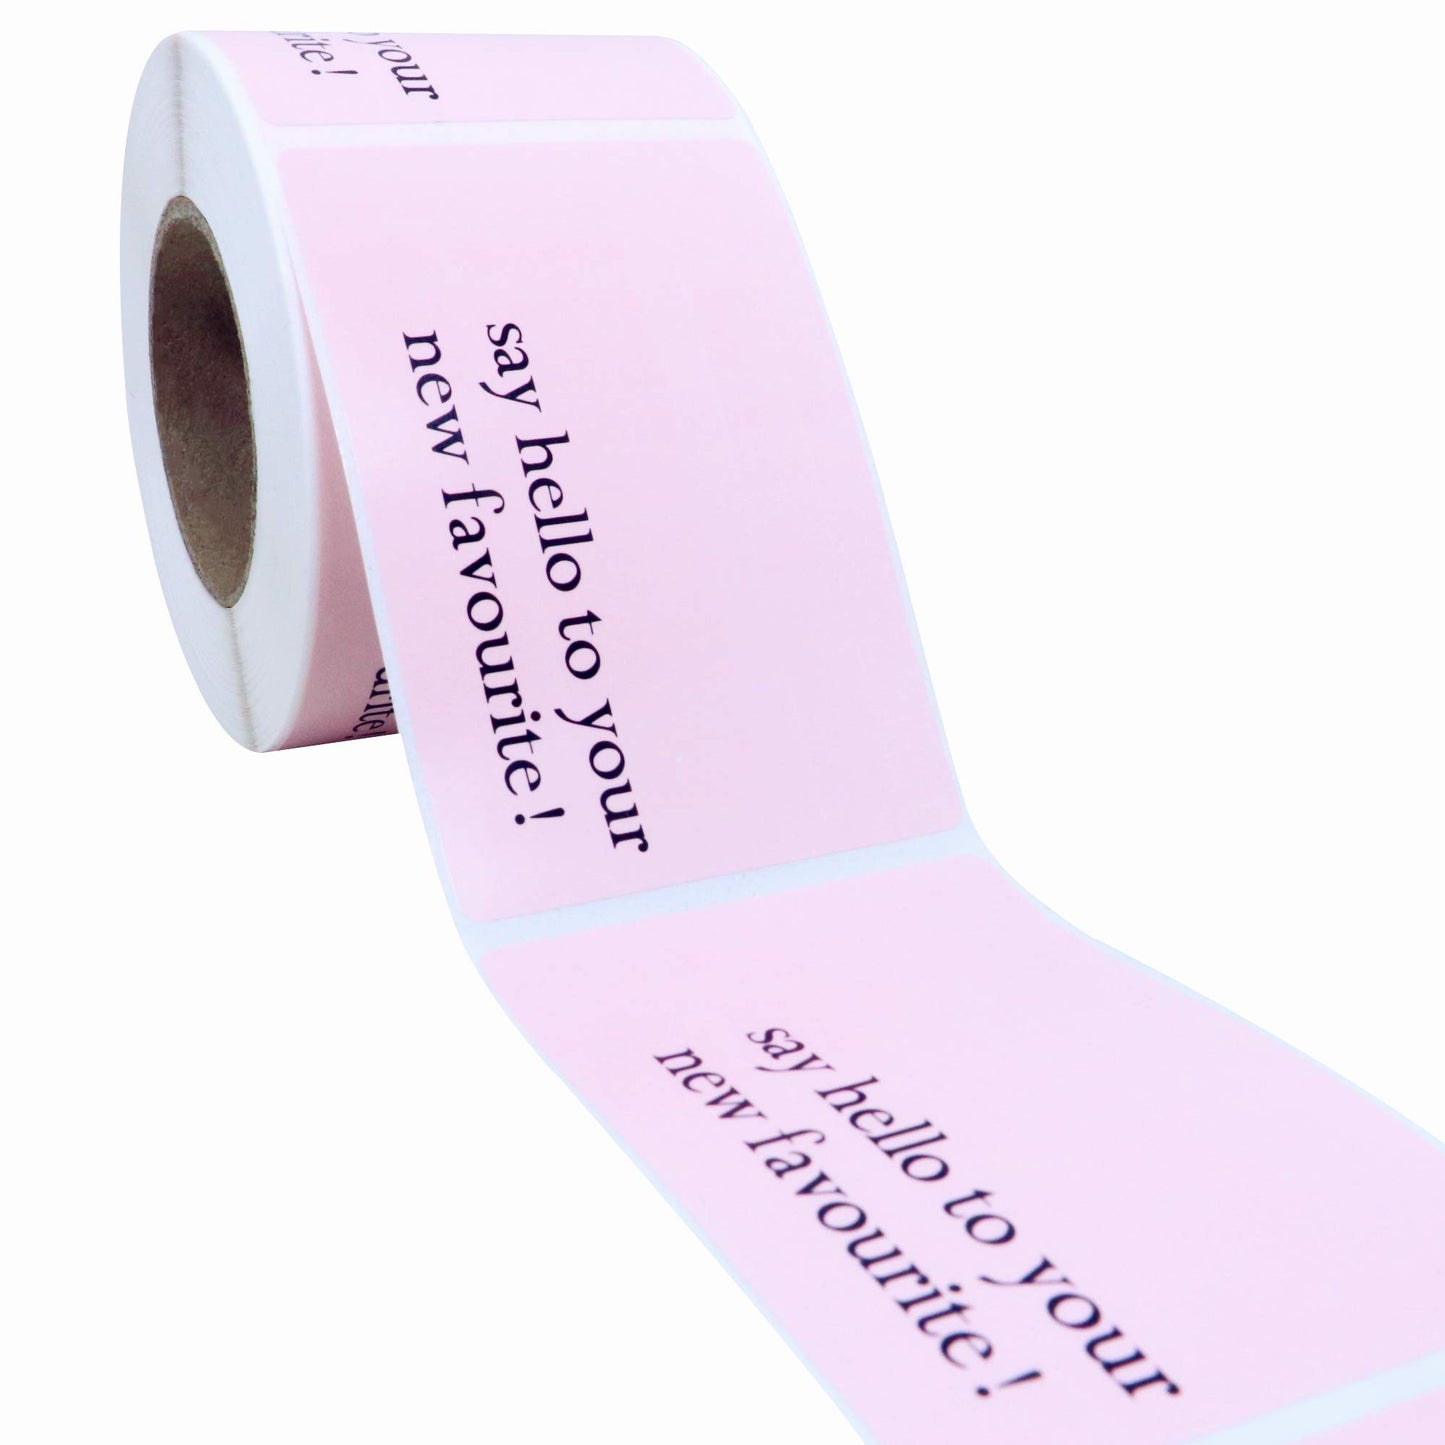 Hybsk Say Hello to Your New Favourite Stickers - Pink Business Thank You Stickers, Shipping Stickers - 2 x 3 Inch 300 Total Labels